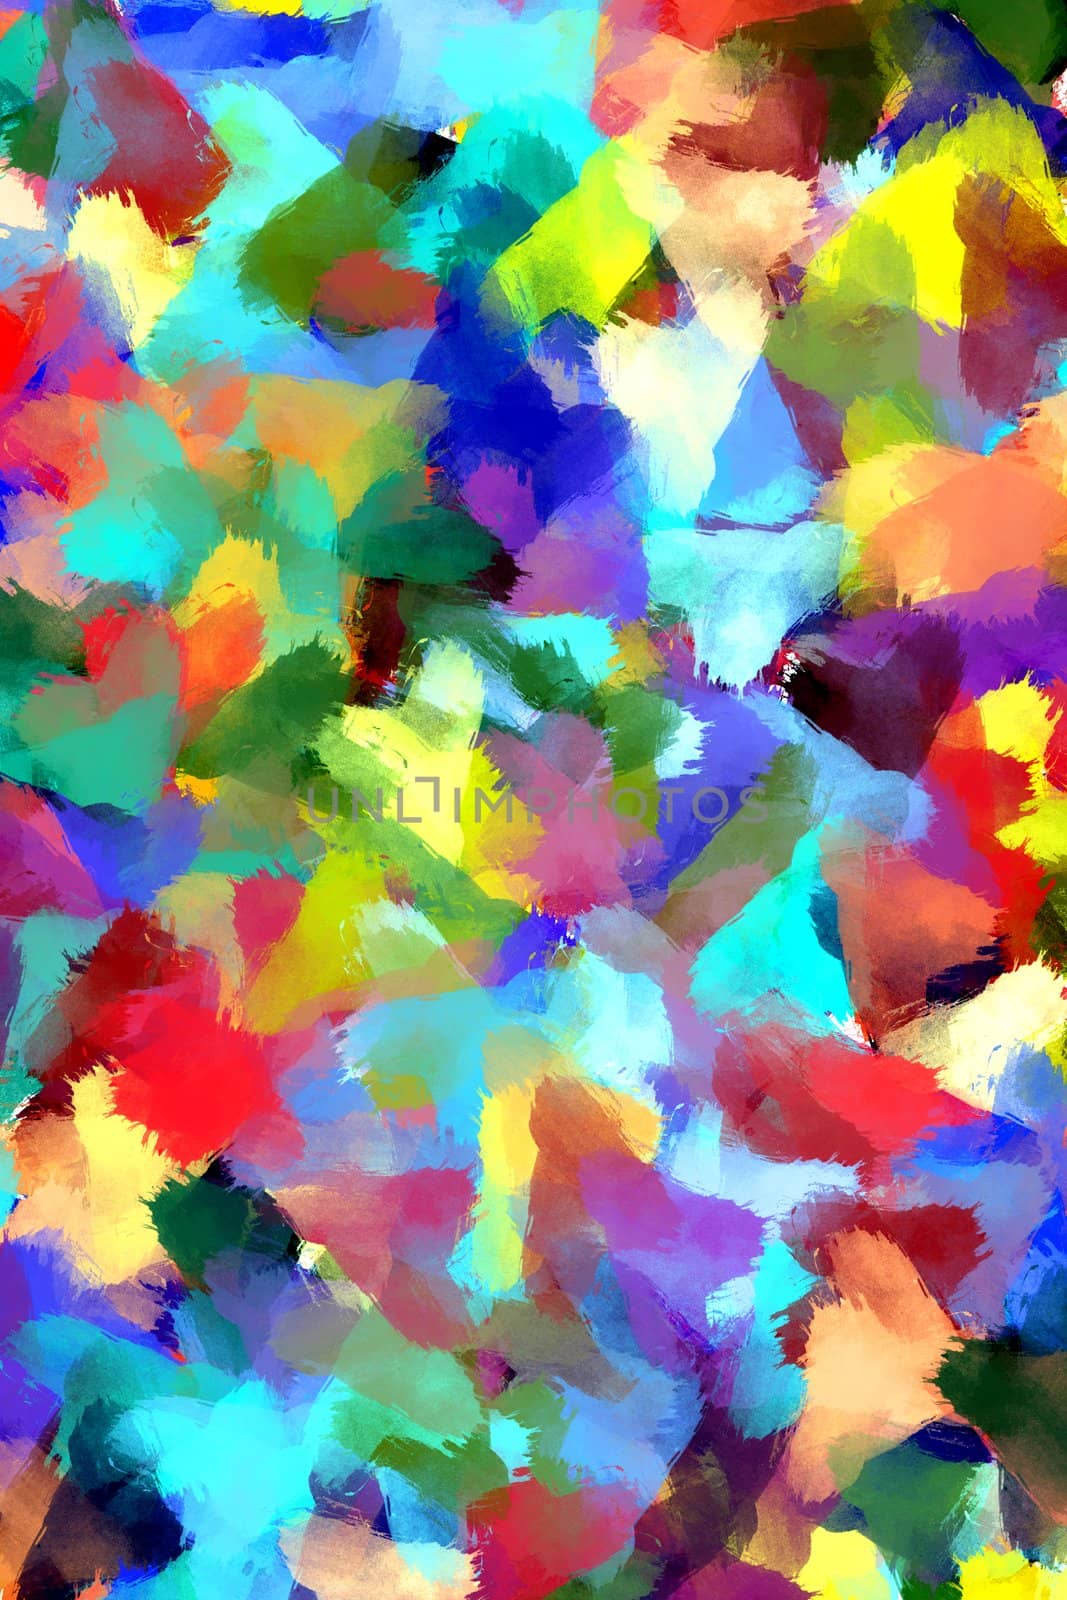 Colorful background in abstract painting style